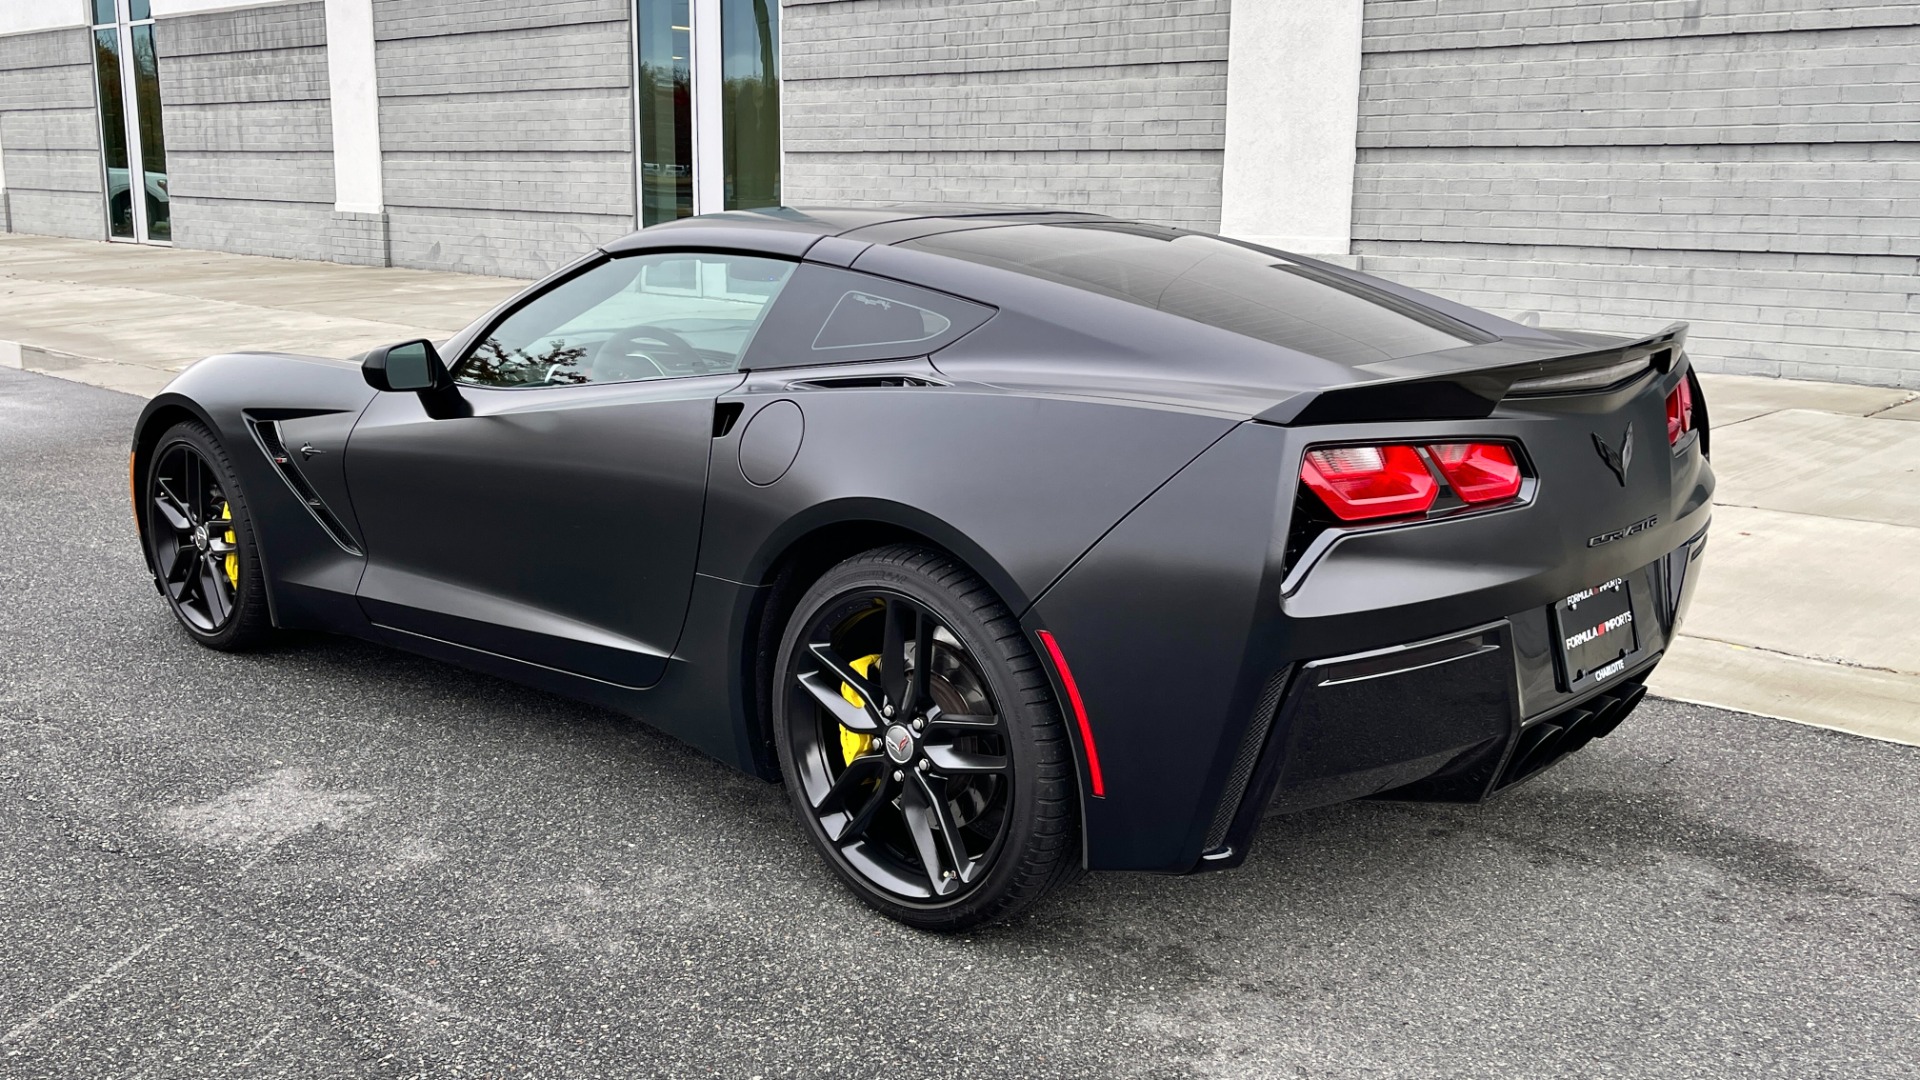 Used 2016 Chevrolet Corvette Z51 2LT / MATTE BLACK / CORSA EXHAUST / COMPETITION SEATS / PERFORMANCE for sale Sold at Formula Imports in Charlotte NC 28227 4